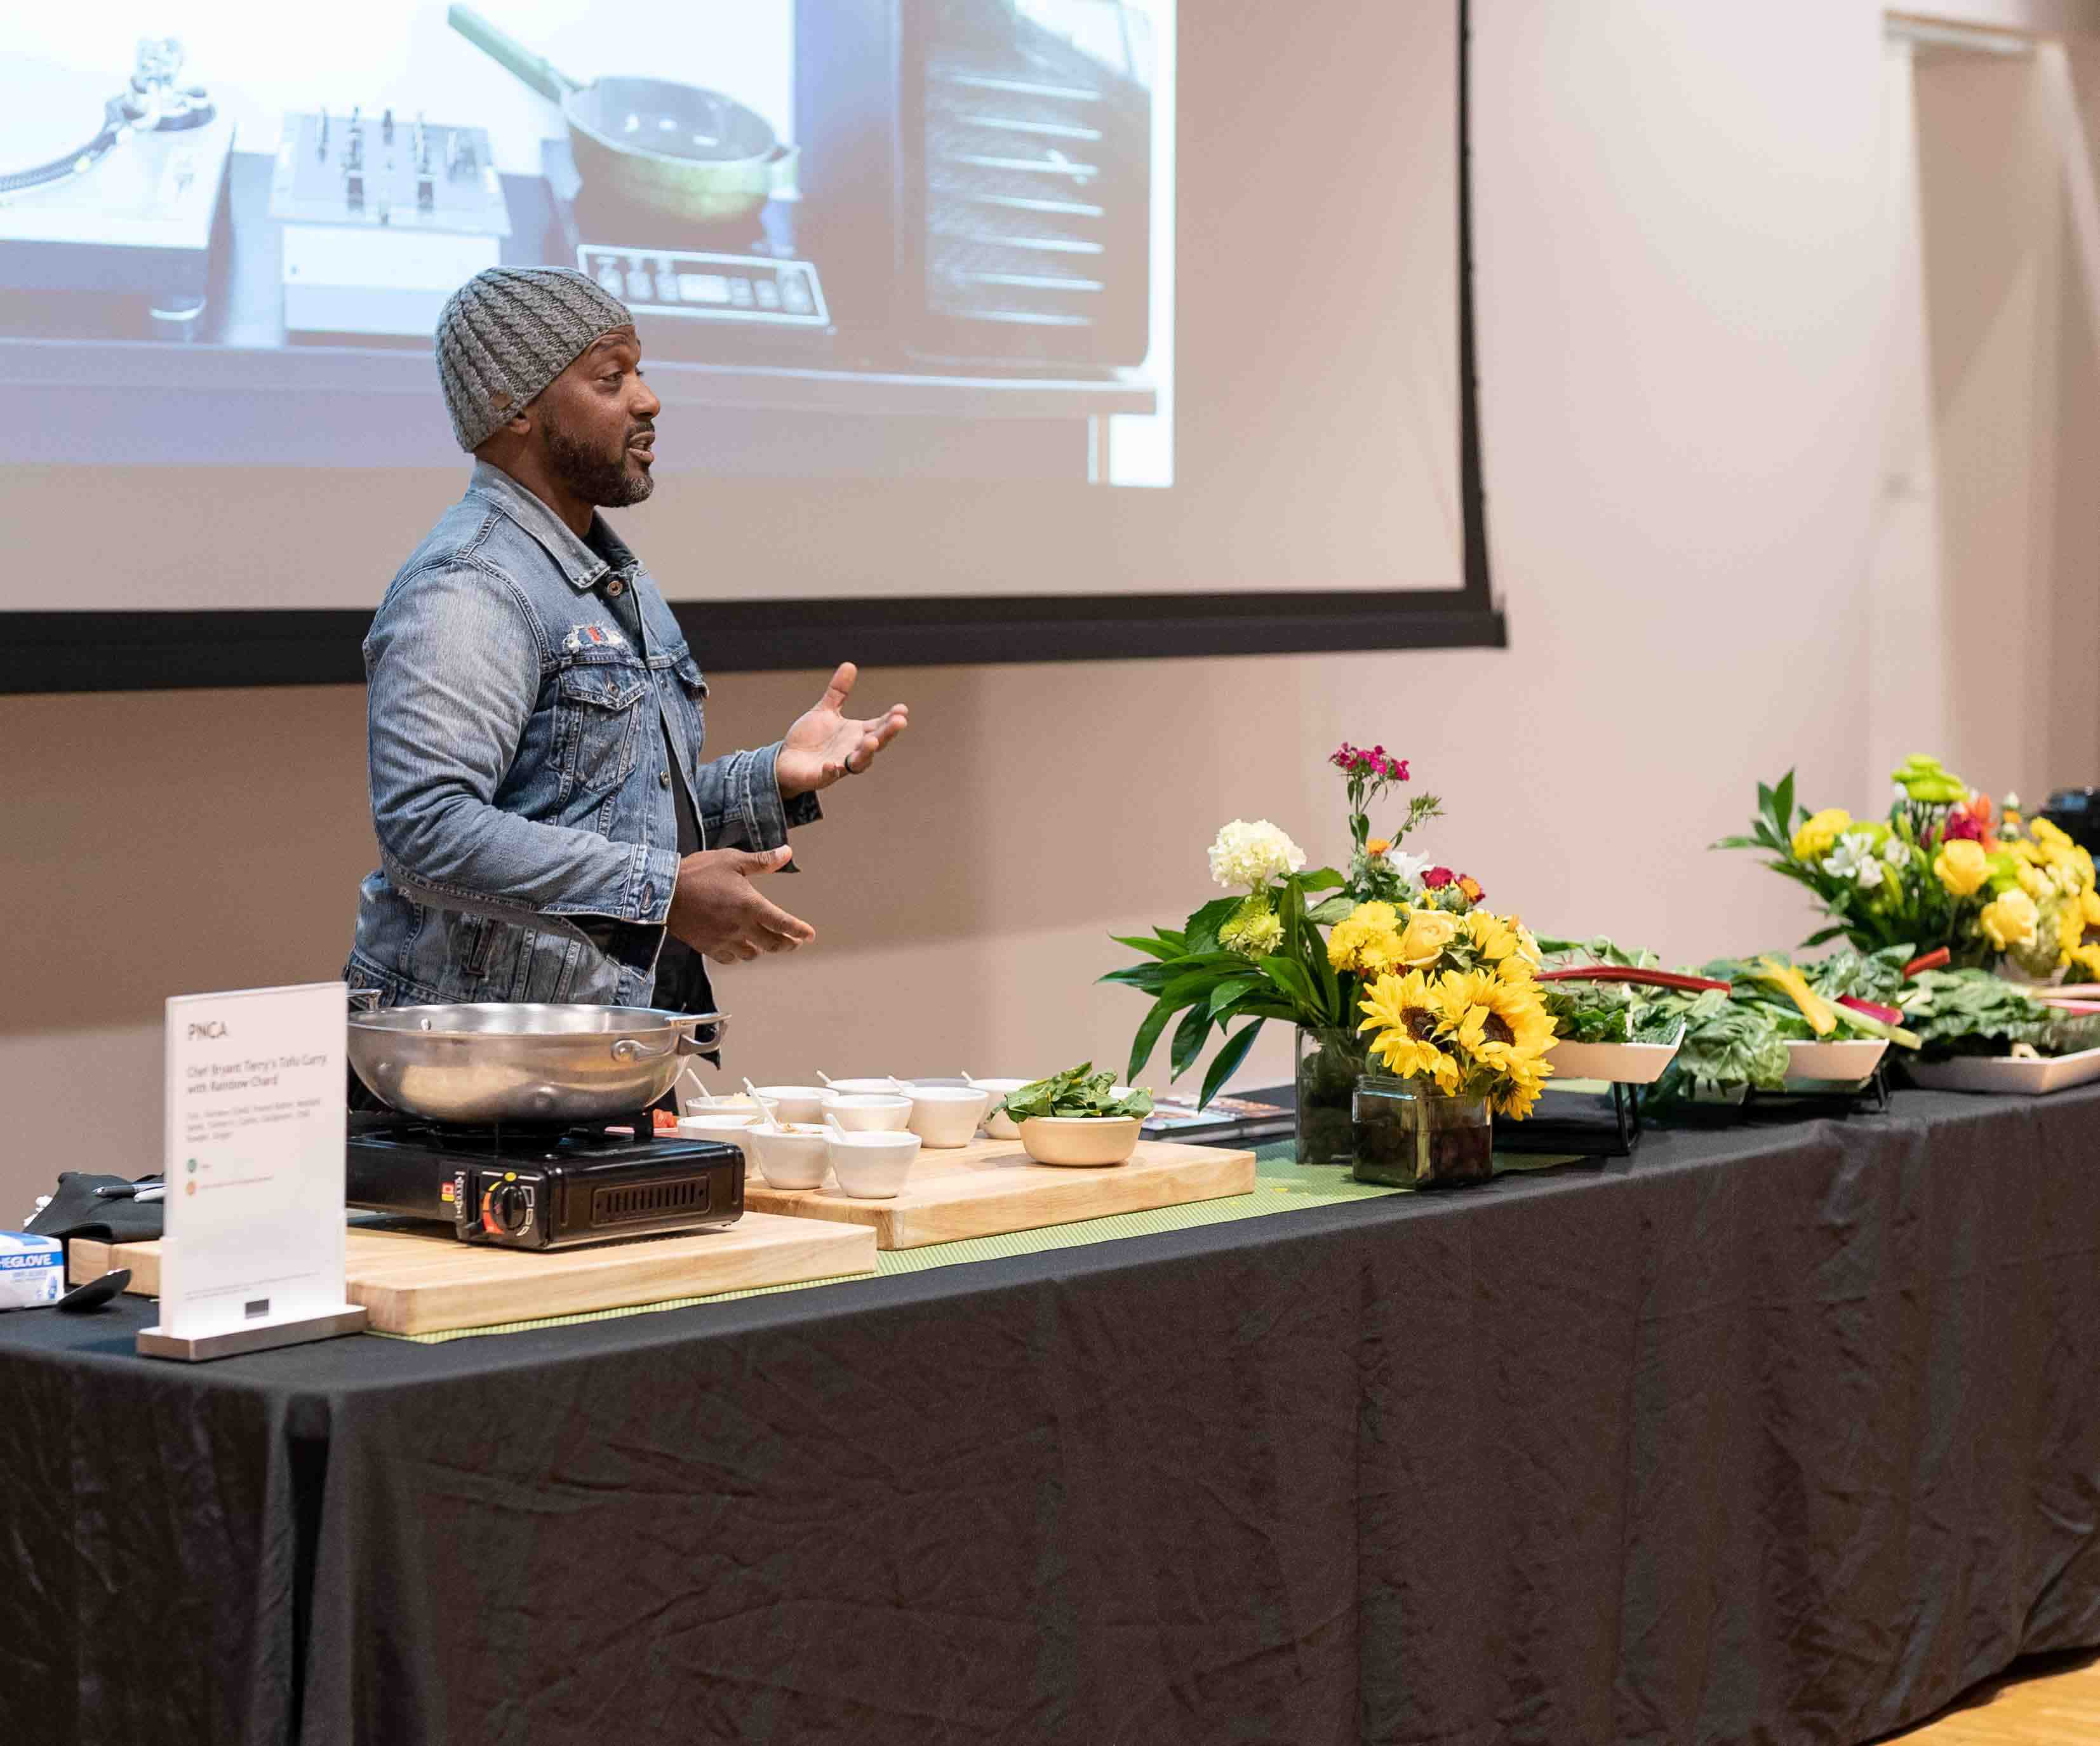 Bryant Terry during the lecture and cooking demonstration at PNCA